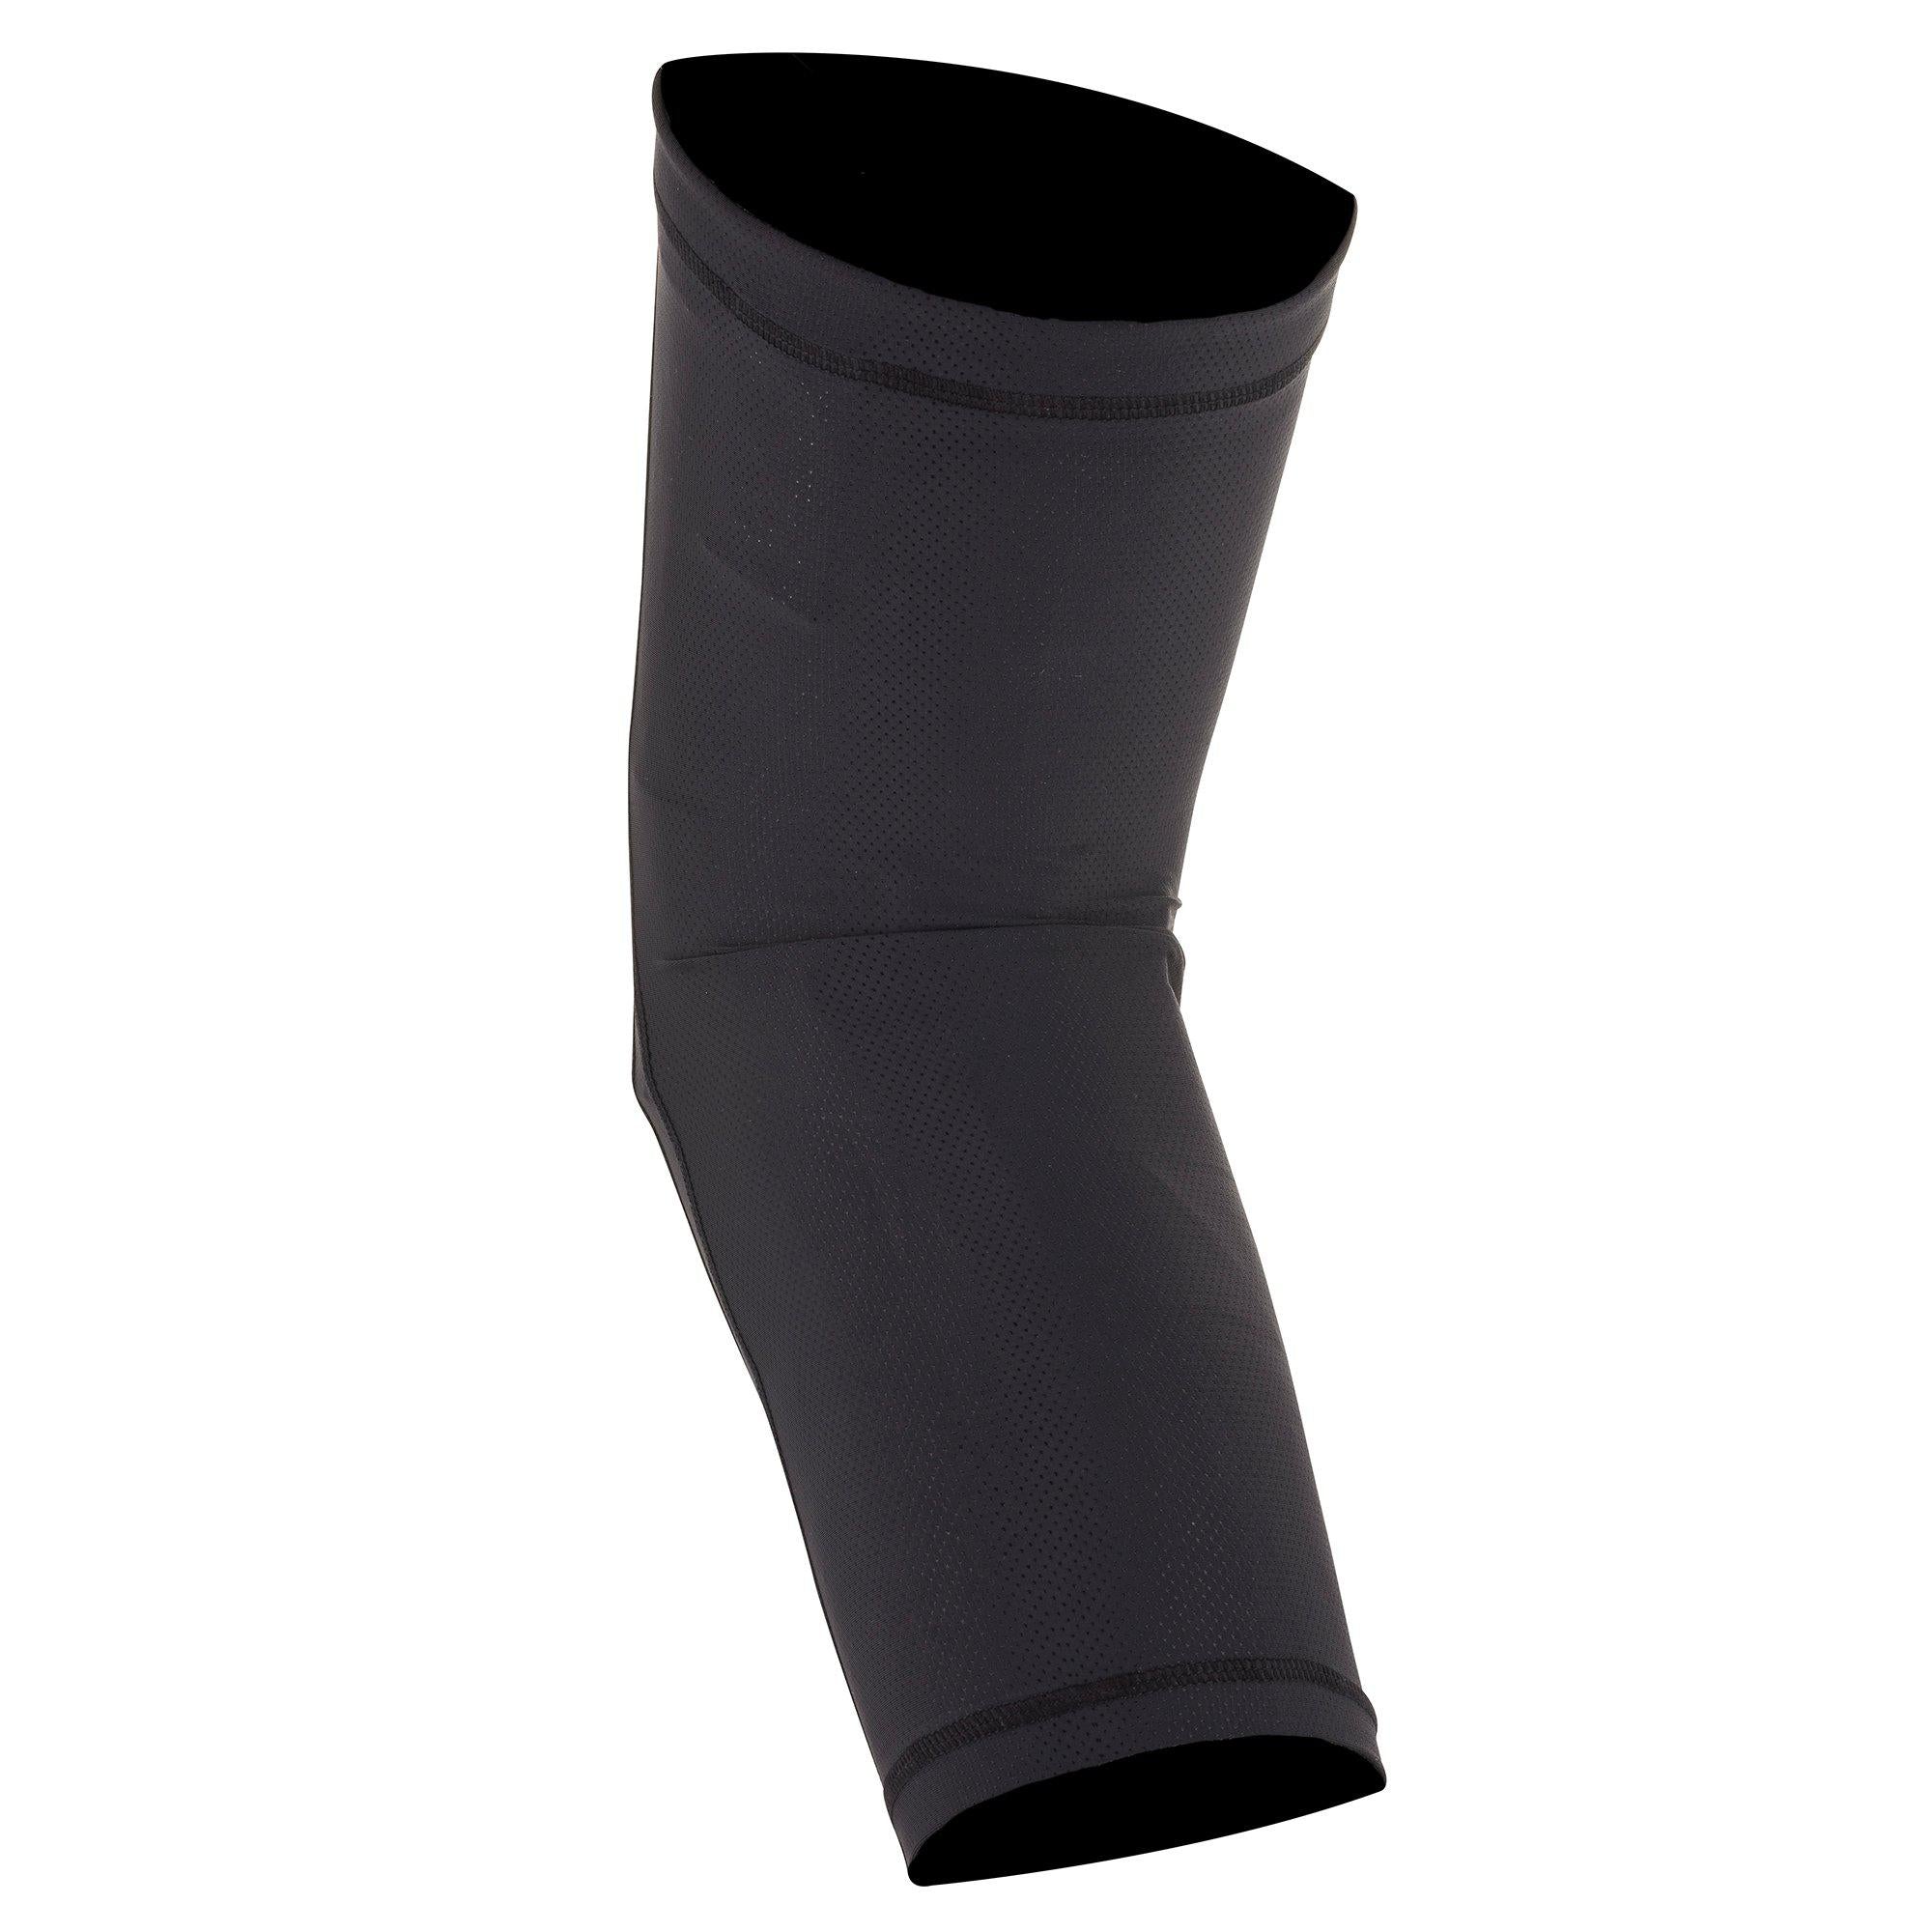 Paragon Lite Youth Knee Protector